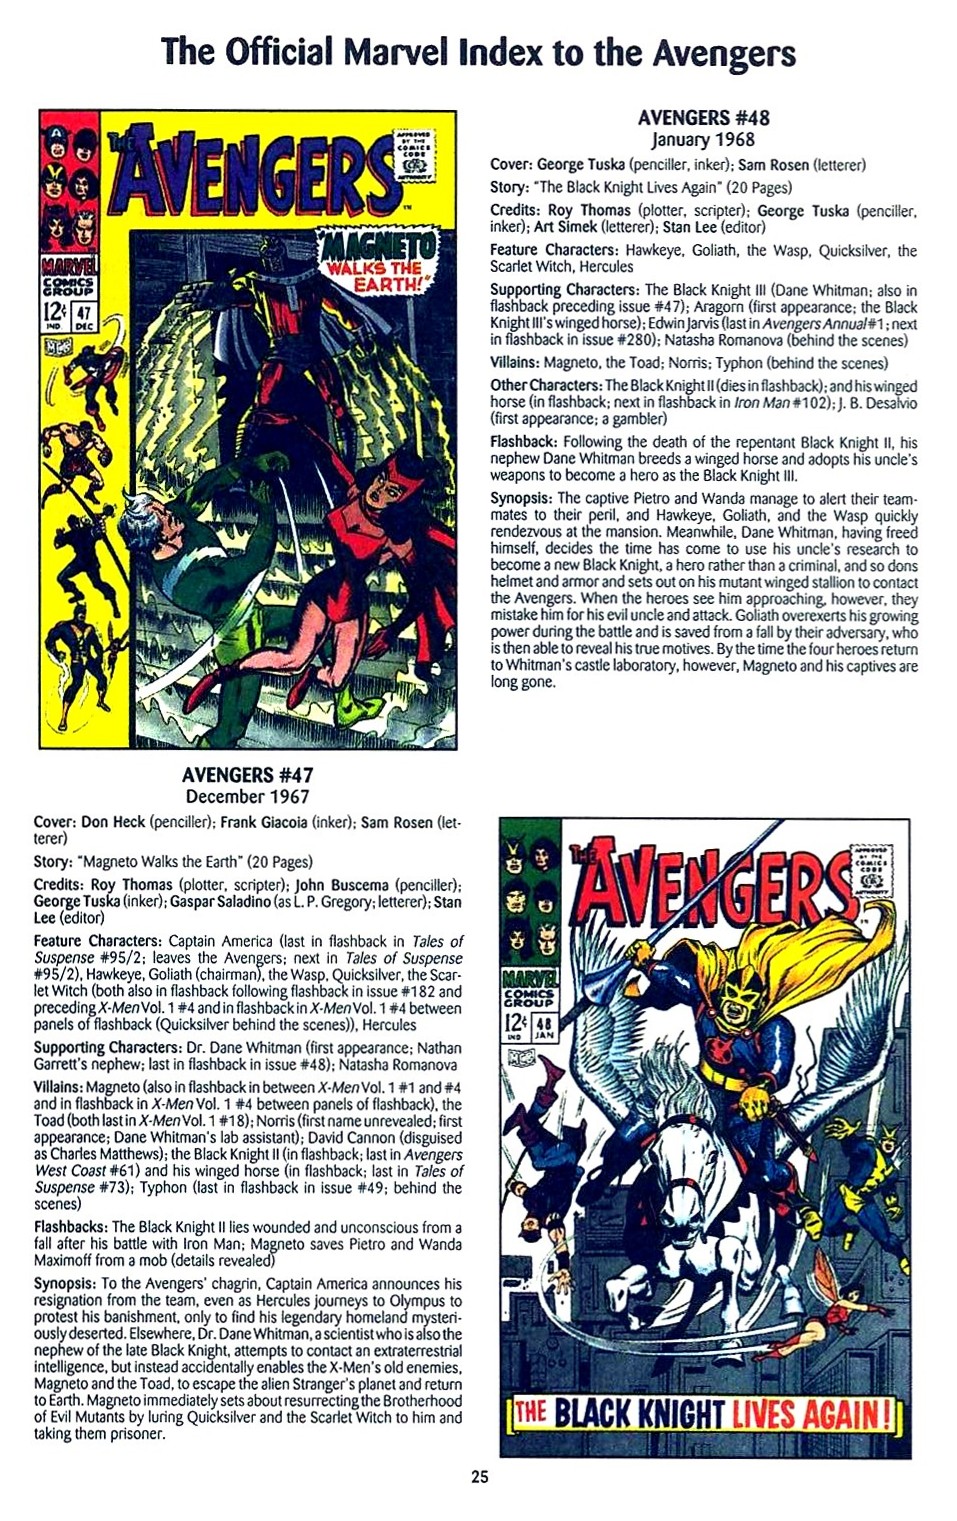 Read online The Official Marvel Index to the Avengers comic -  Issue #1 - 27